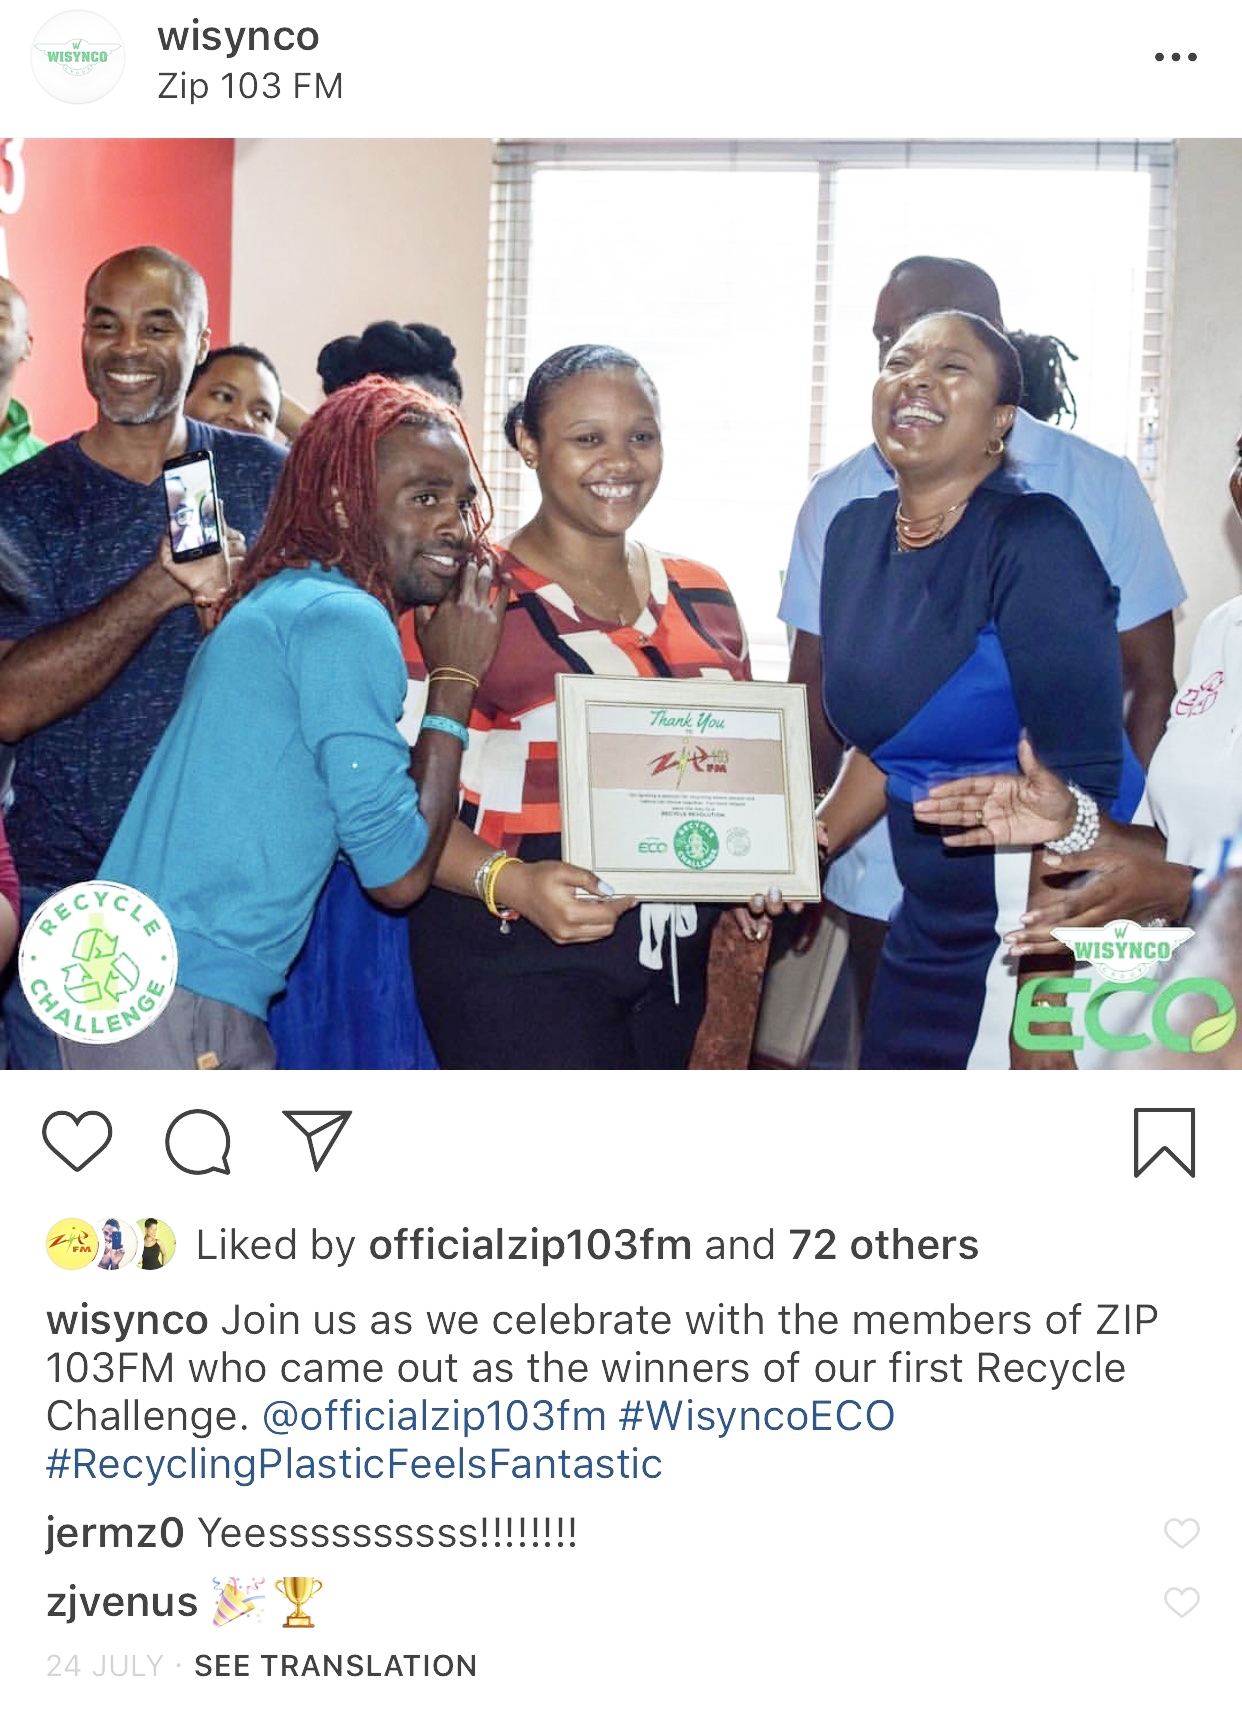 Recycle Champions!